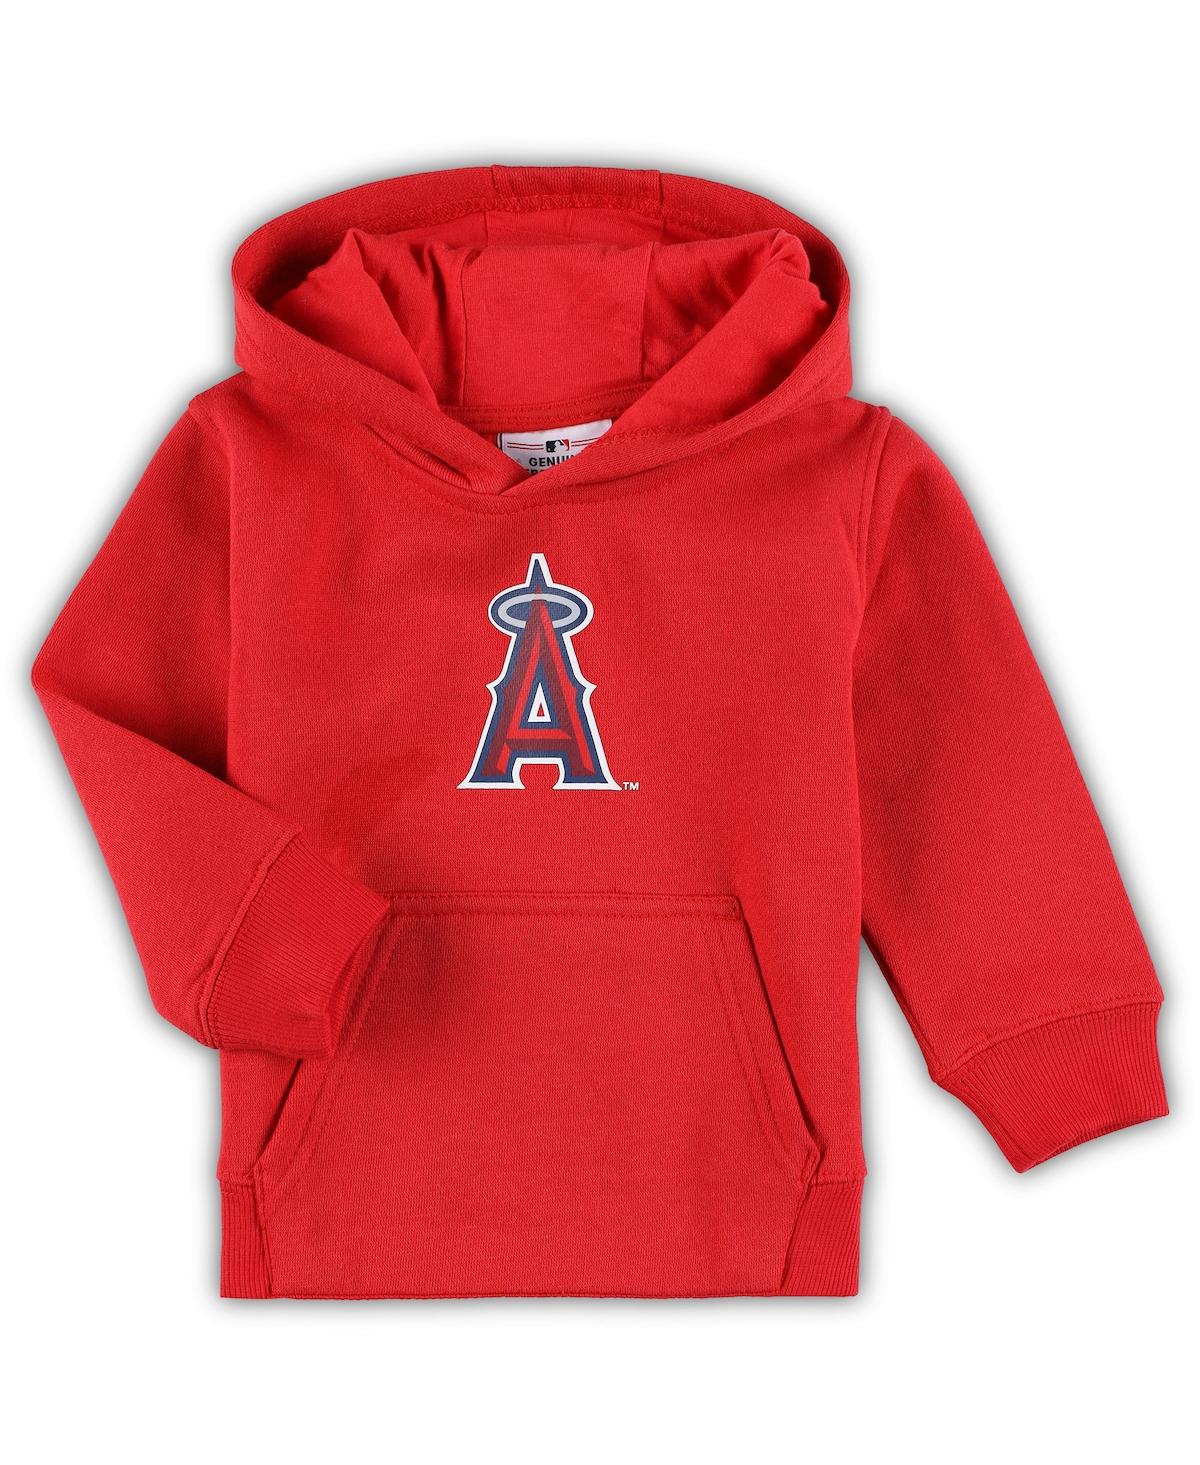 Outerstuff Babies' Toddler Boys And Girls Red Los Angeles Angels Team Primary Logo Fleece Pullover Hoodie